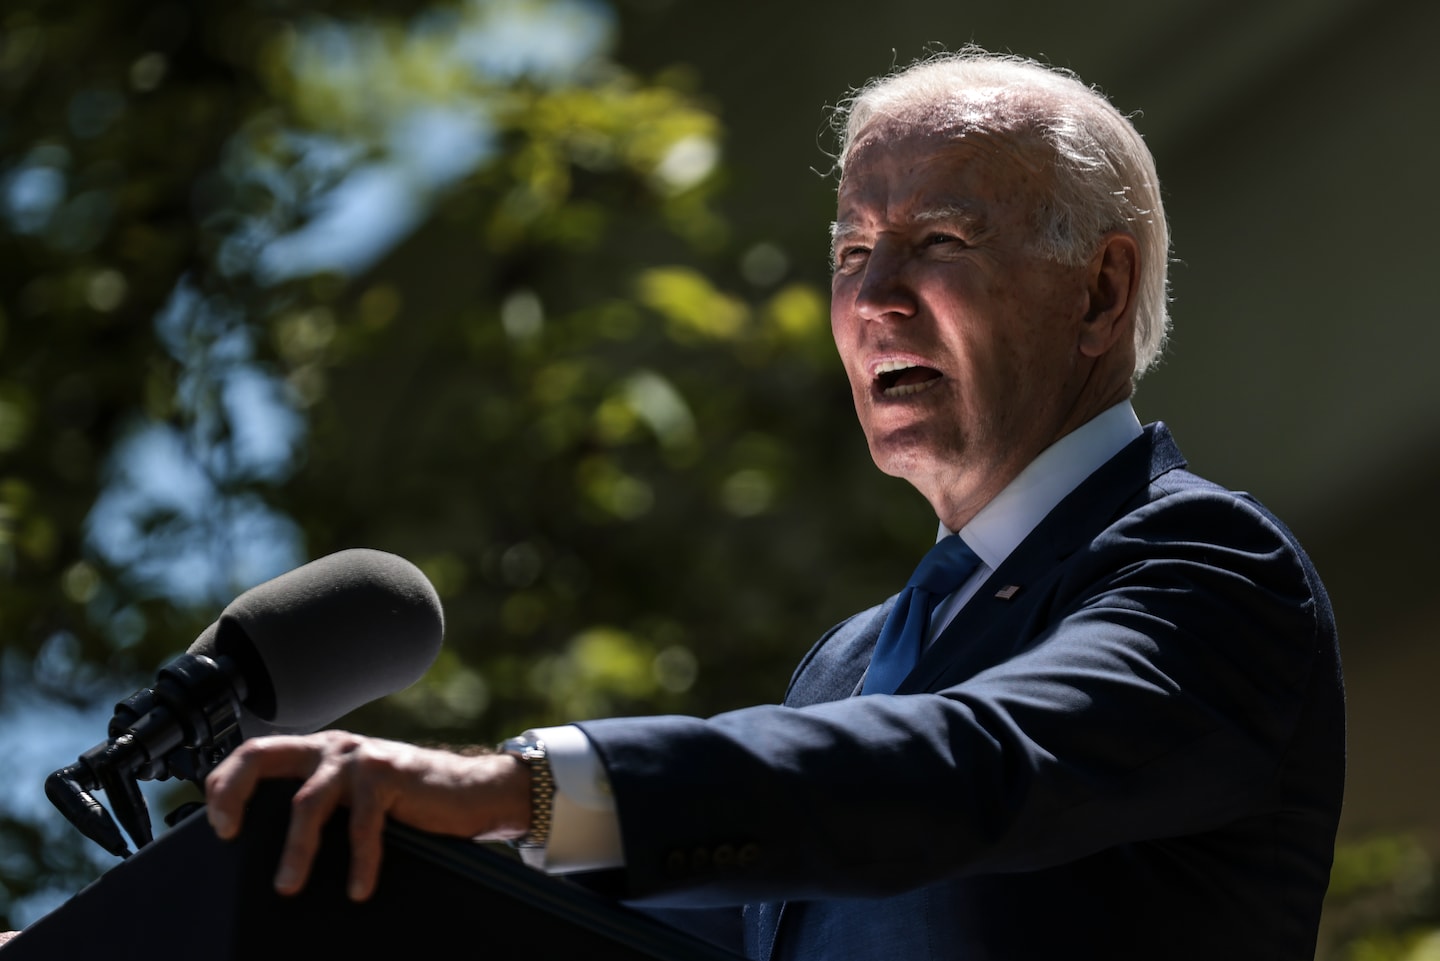 Low-income earners to get high-speed Internet for $30 under new Biden program